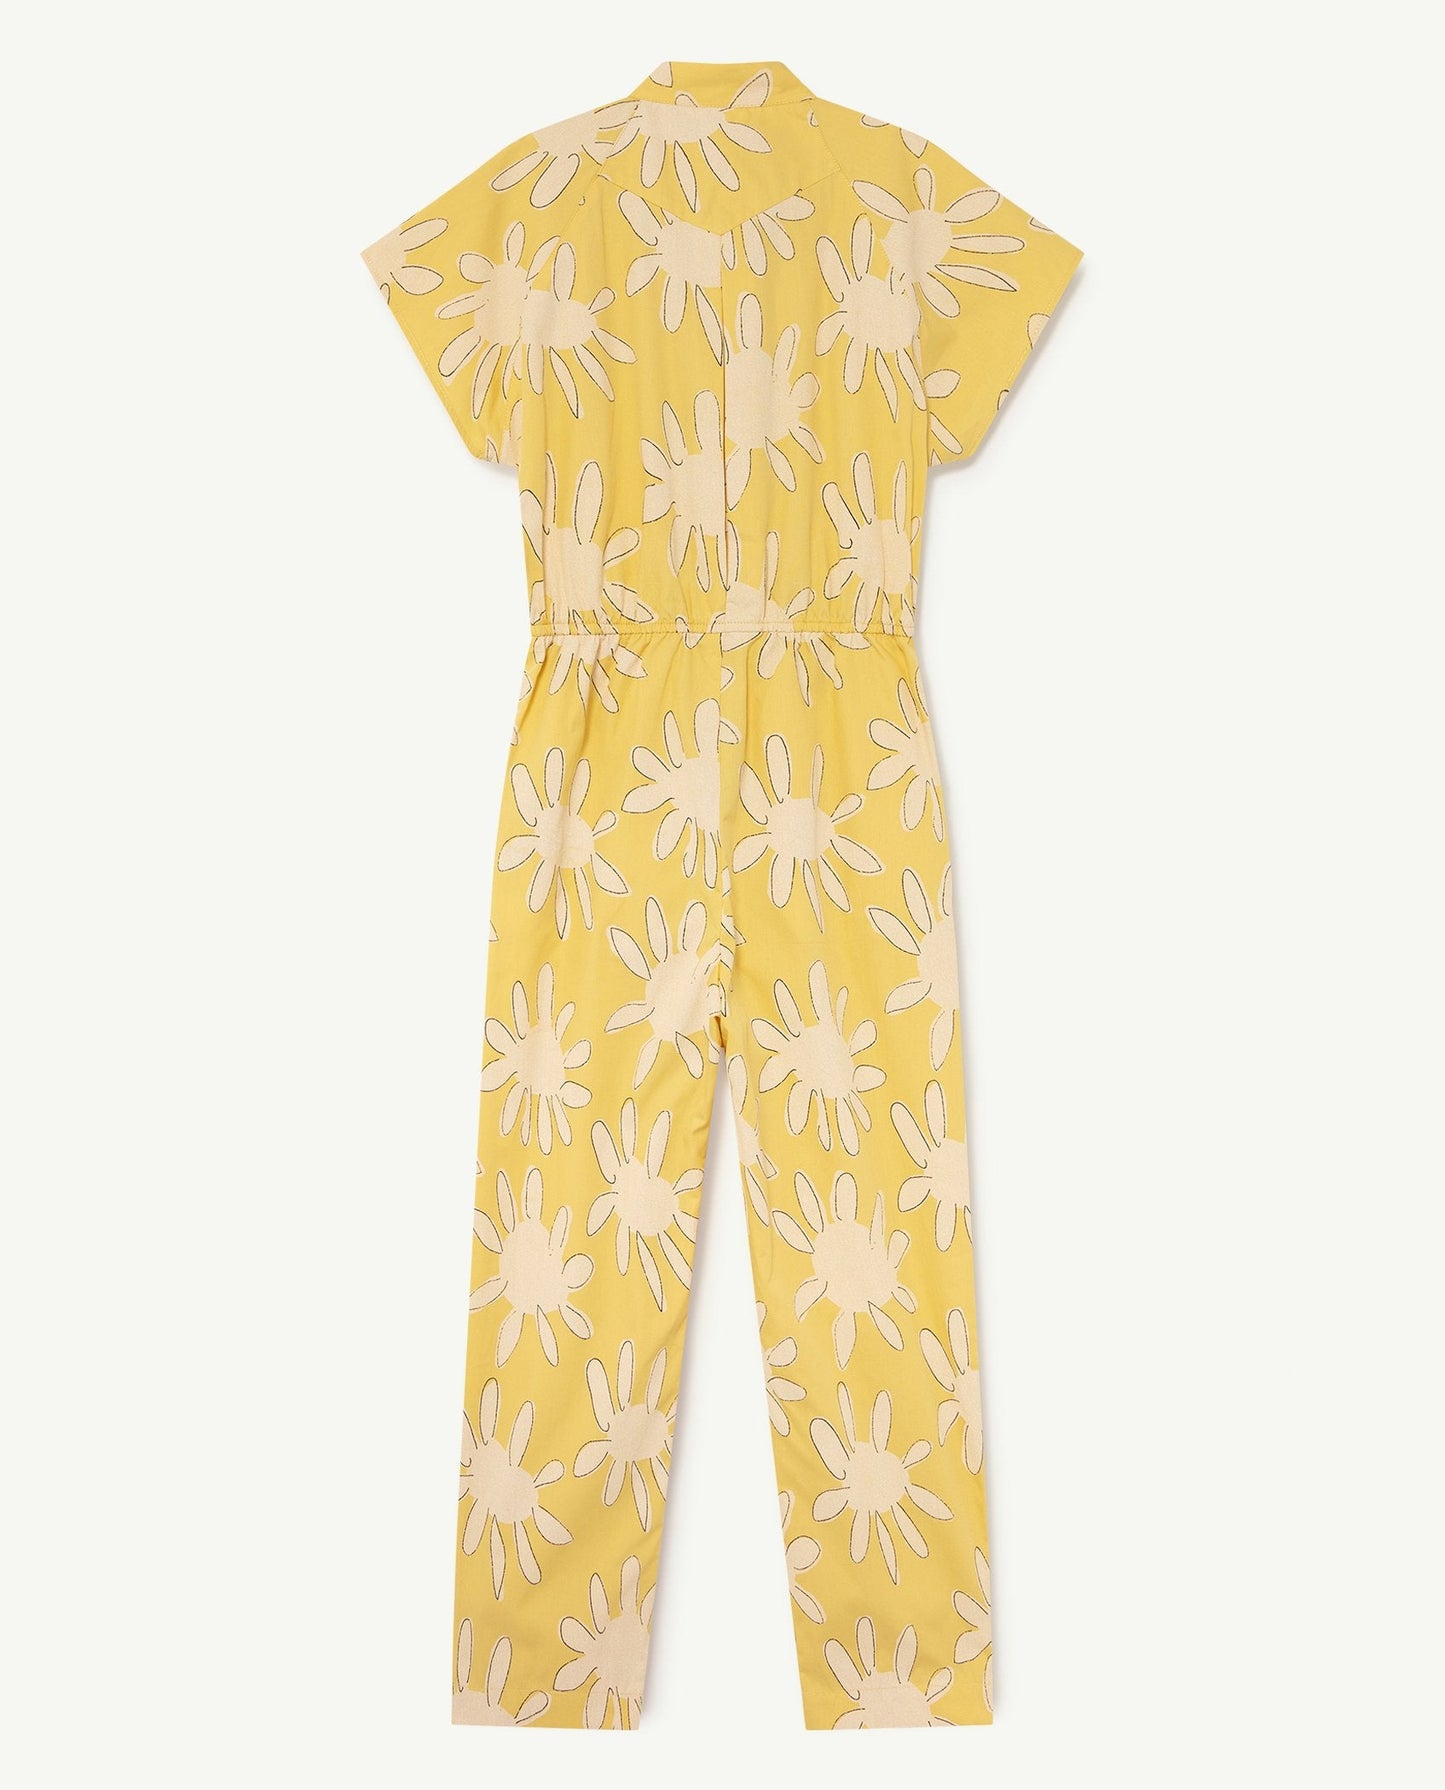 Grasshopper kids jumpsuit Yellow Jumpsuits The Animals Observatory 